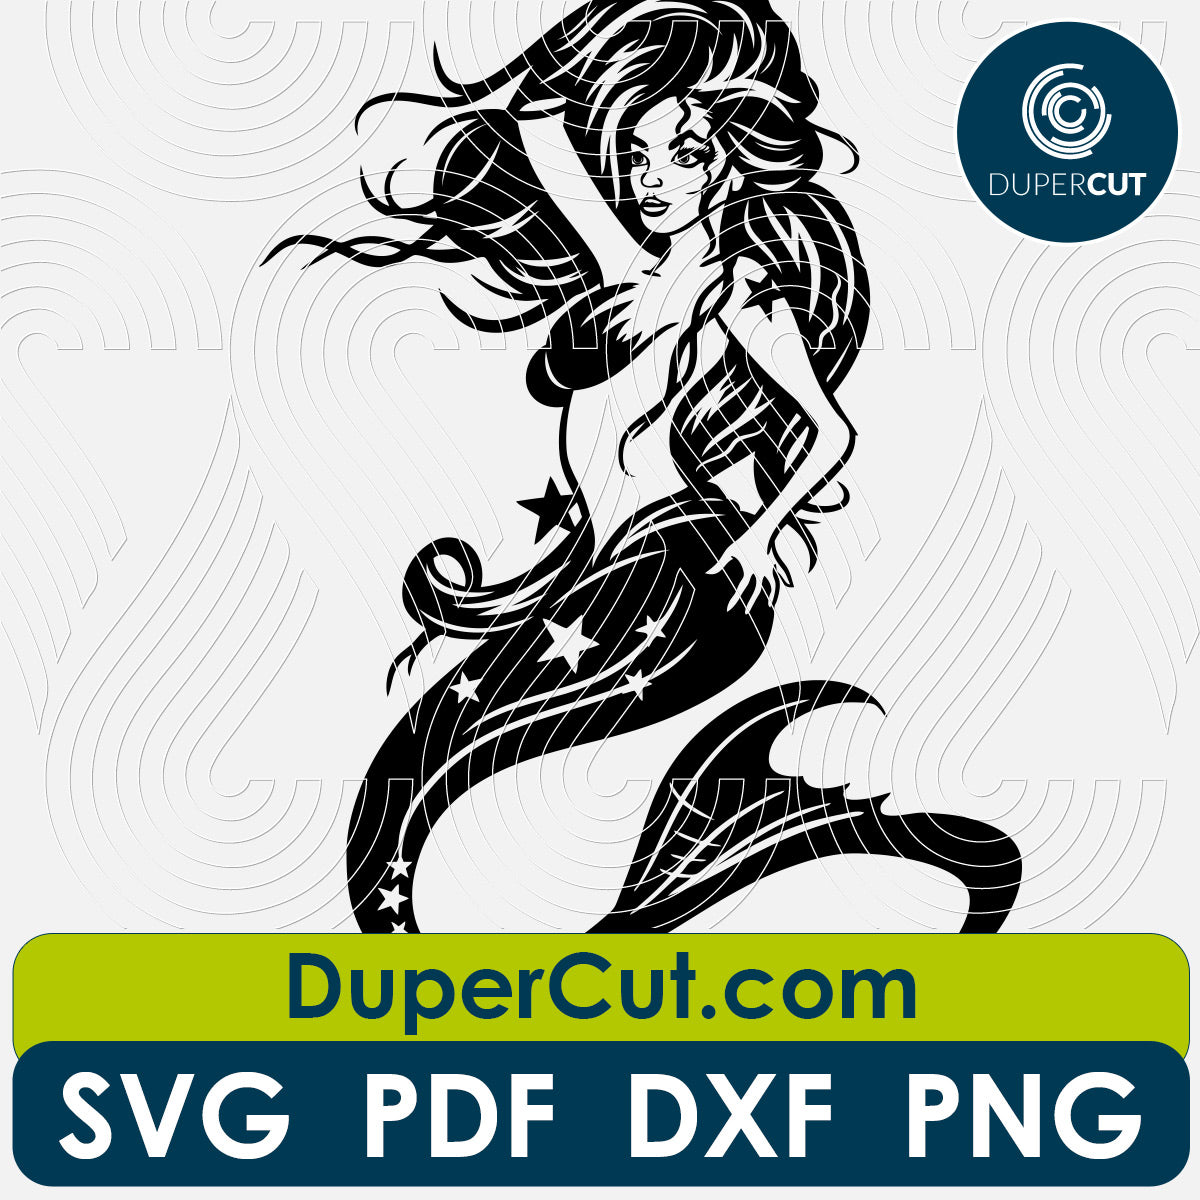 Realistic mermaid illustration, Black design. SVG JPEG DXF files. Template for paper cutting, laser, print on demand. For use with Cricut, Glowforge, Silhouette Cameo, CNC machines. Personal or commercial license.